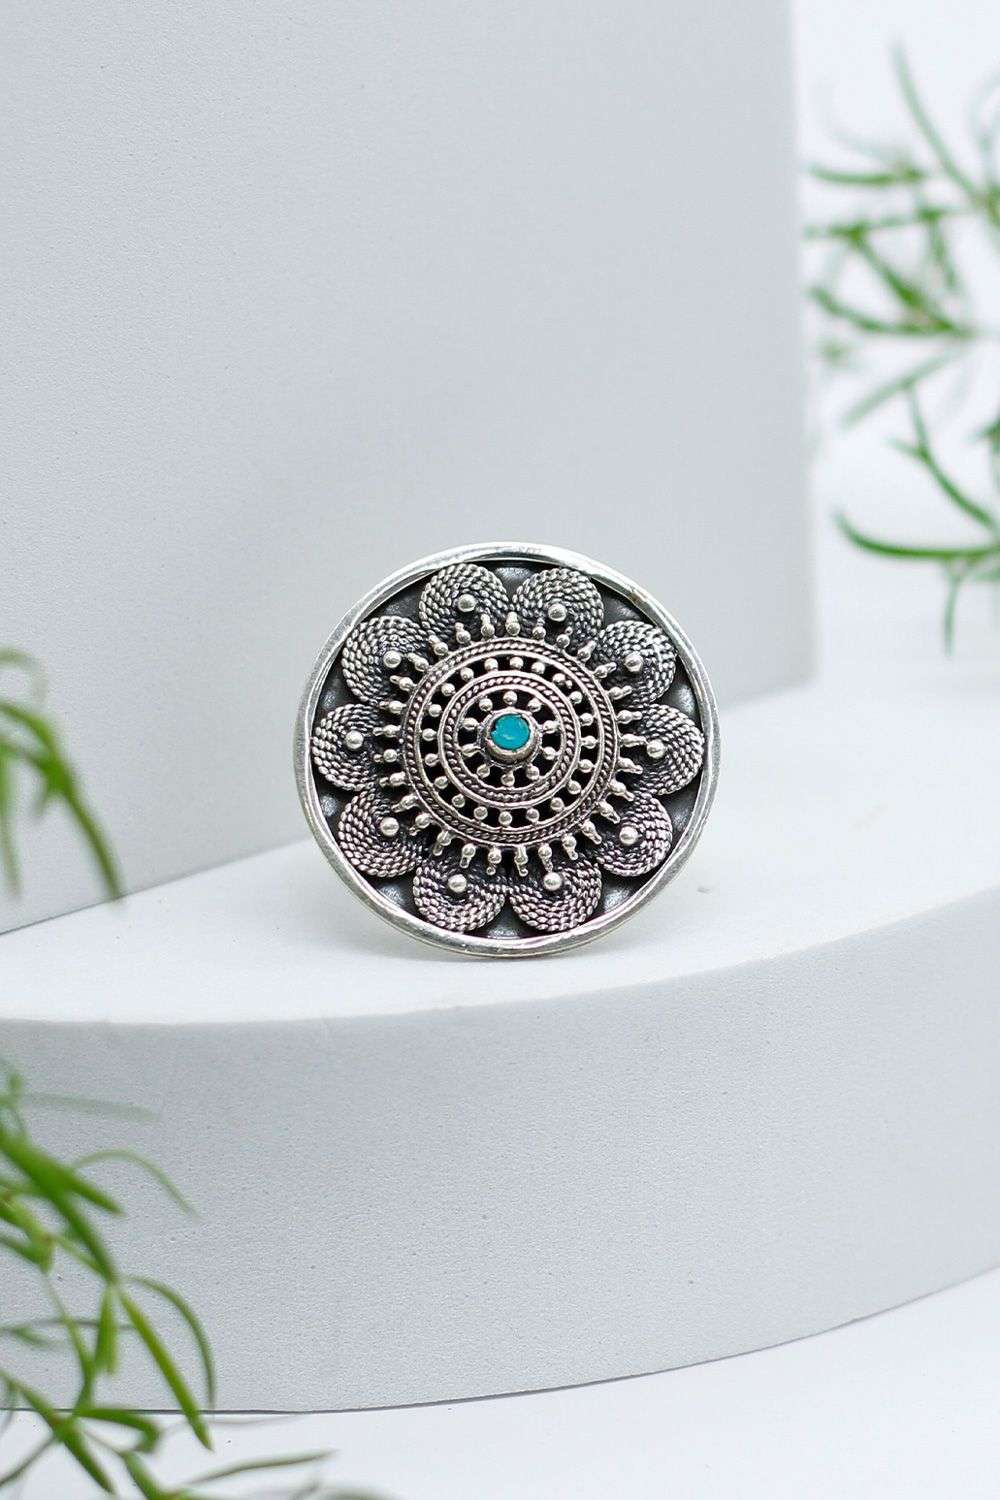 Buy Turquoise Ring, Oval Gemstone, Tibetan Turquoise, Sterling Silver Ring,  Zig Zag Bezel, Handmade Solid Silver Ring, Blue Turquoise, Flat Band Online  in India… | Silver rings handmade, Gemstones, Turquoise ring